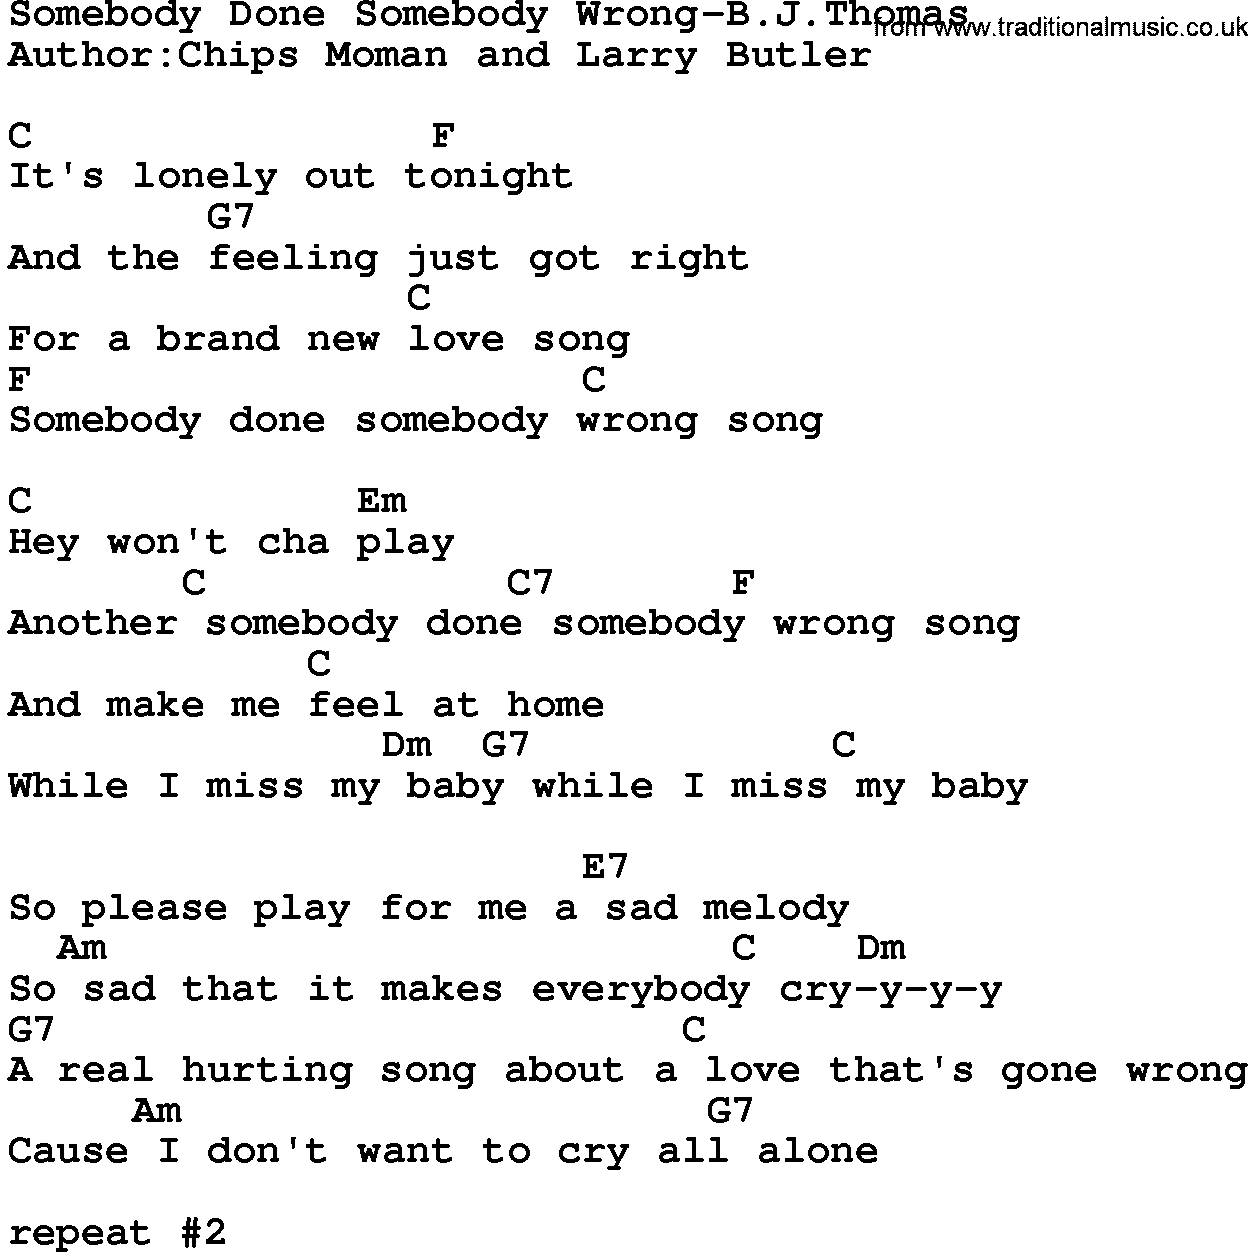 Country music song: Somebody Done Somebody Wrong-Bjthomas lyrics and chords